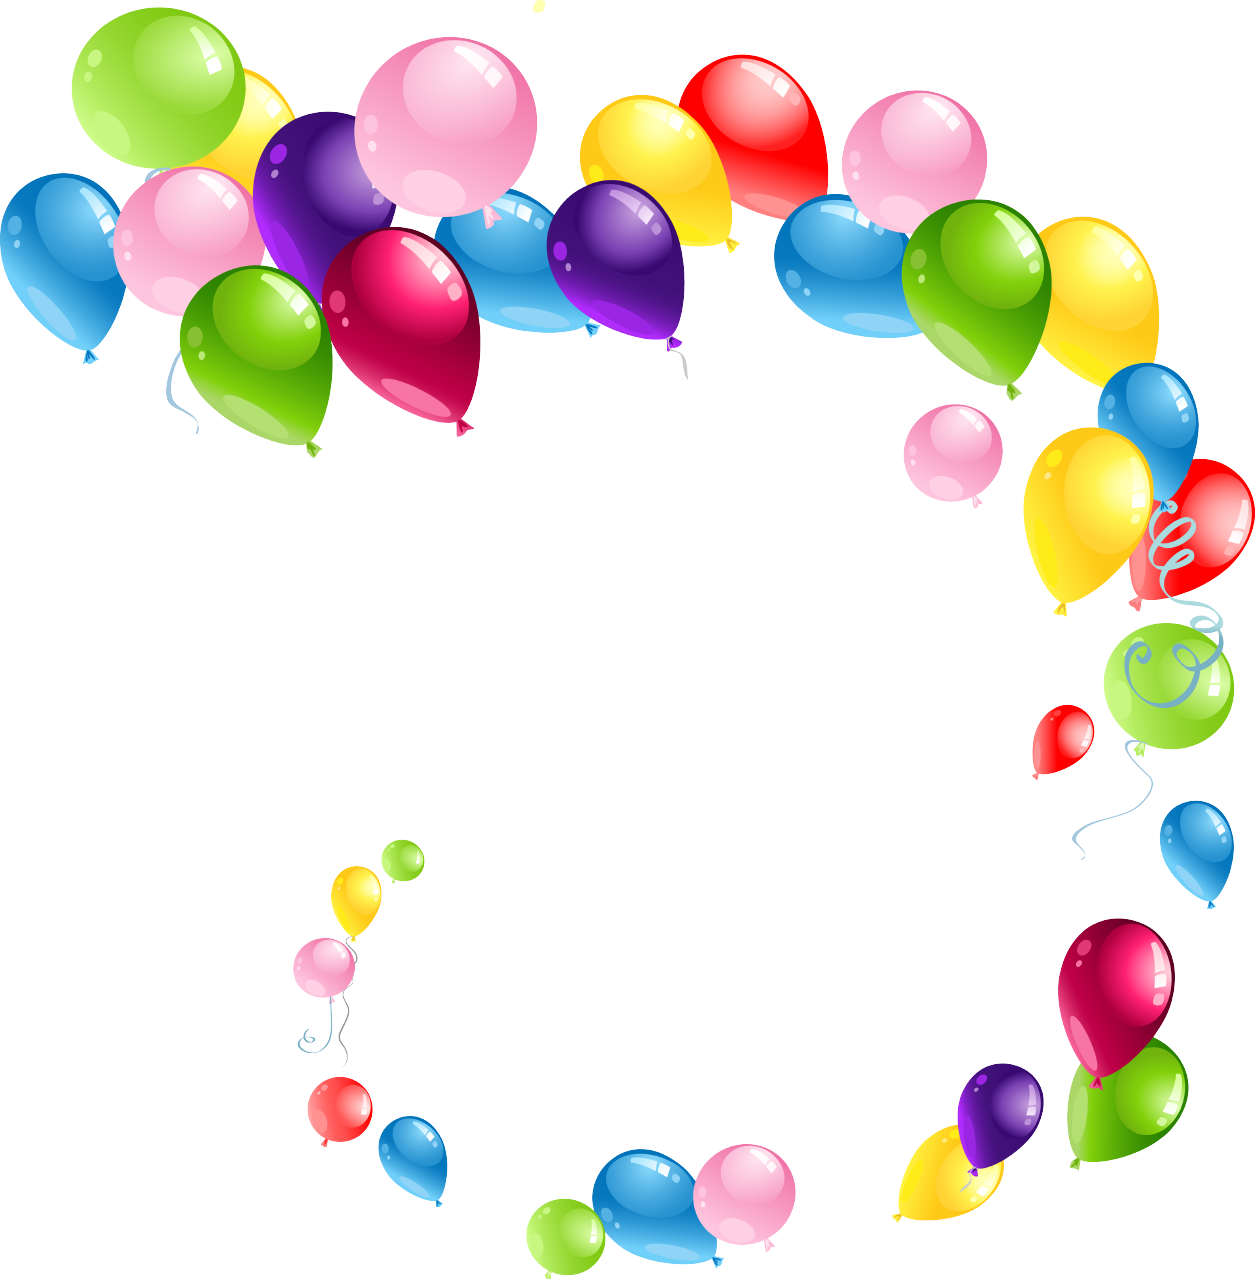 Balloons Png 6 Png Image - Balloon, Transparent background PNG HD thumbnail